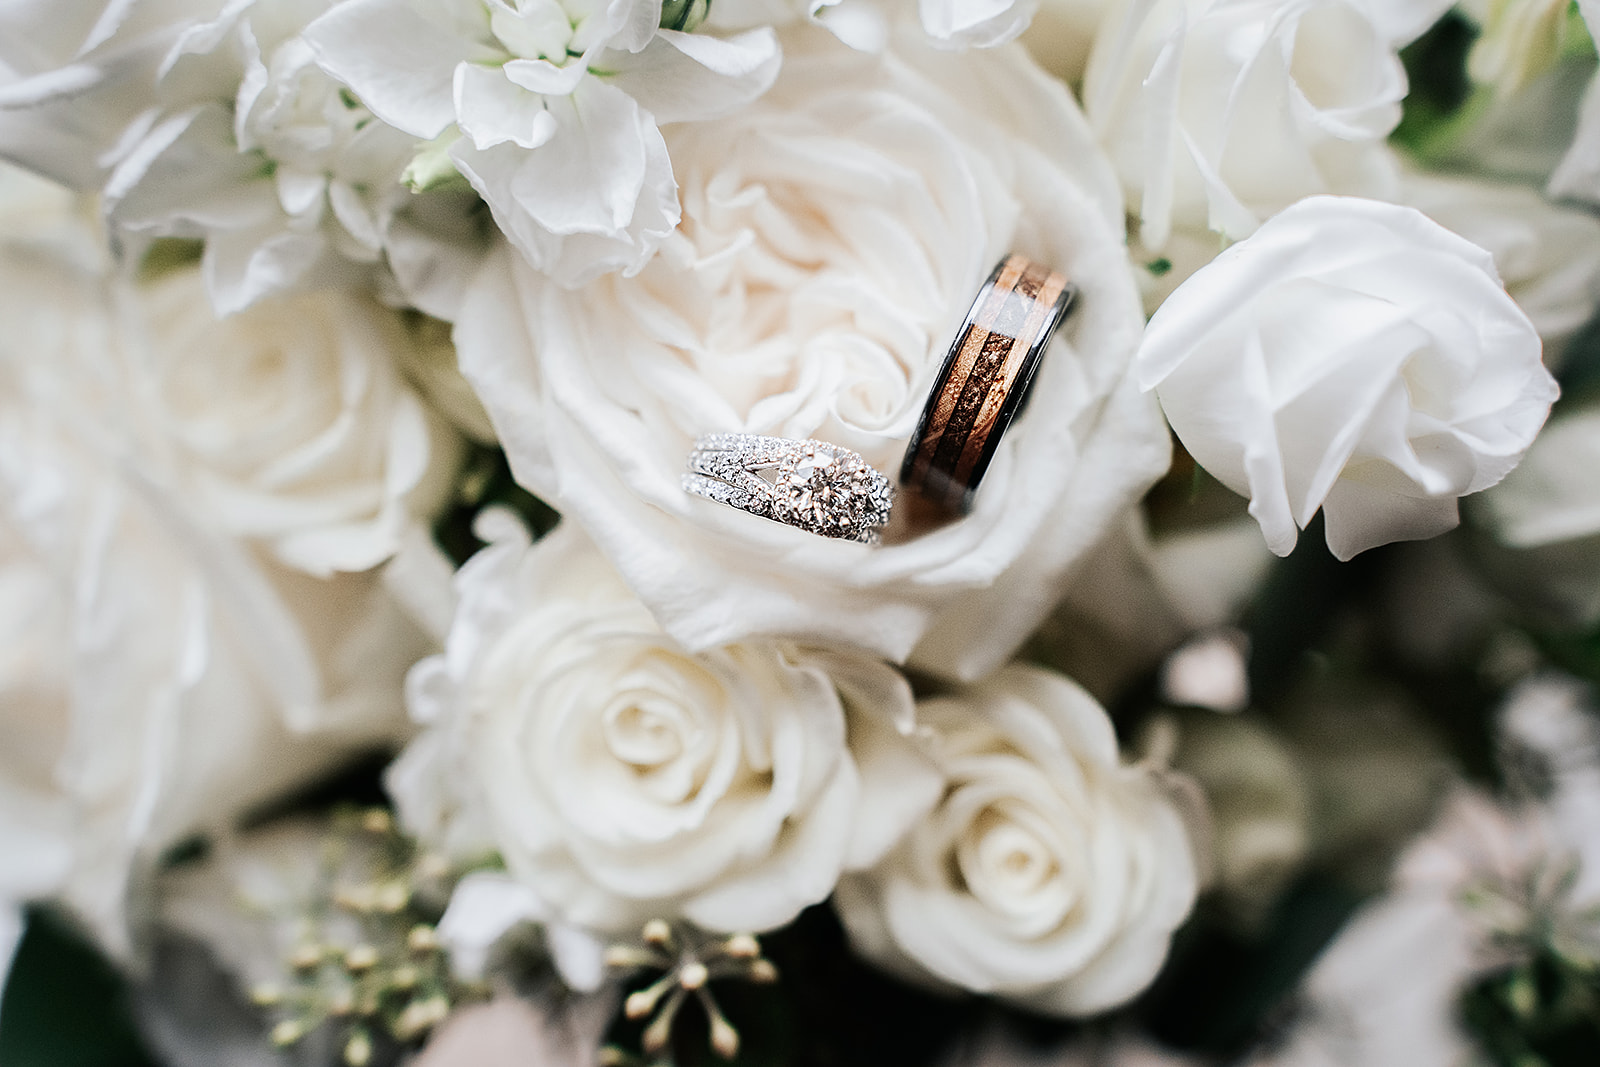 Artistic wedding bouquet with rings in flower